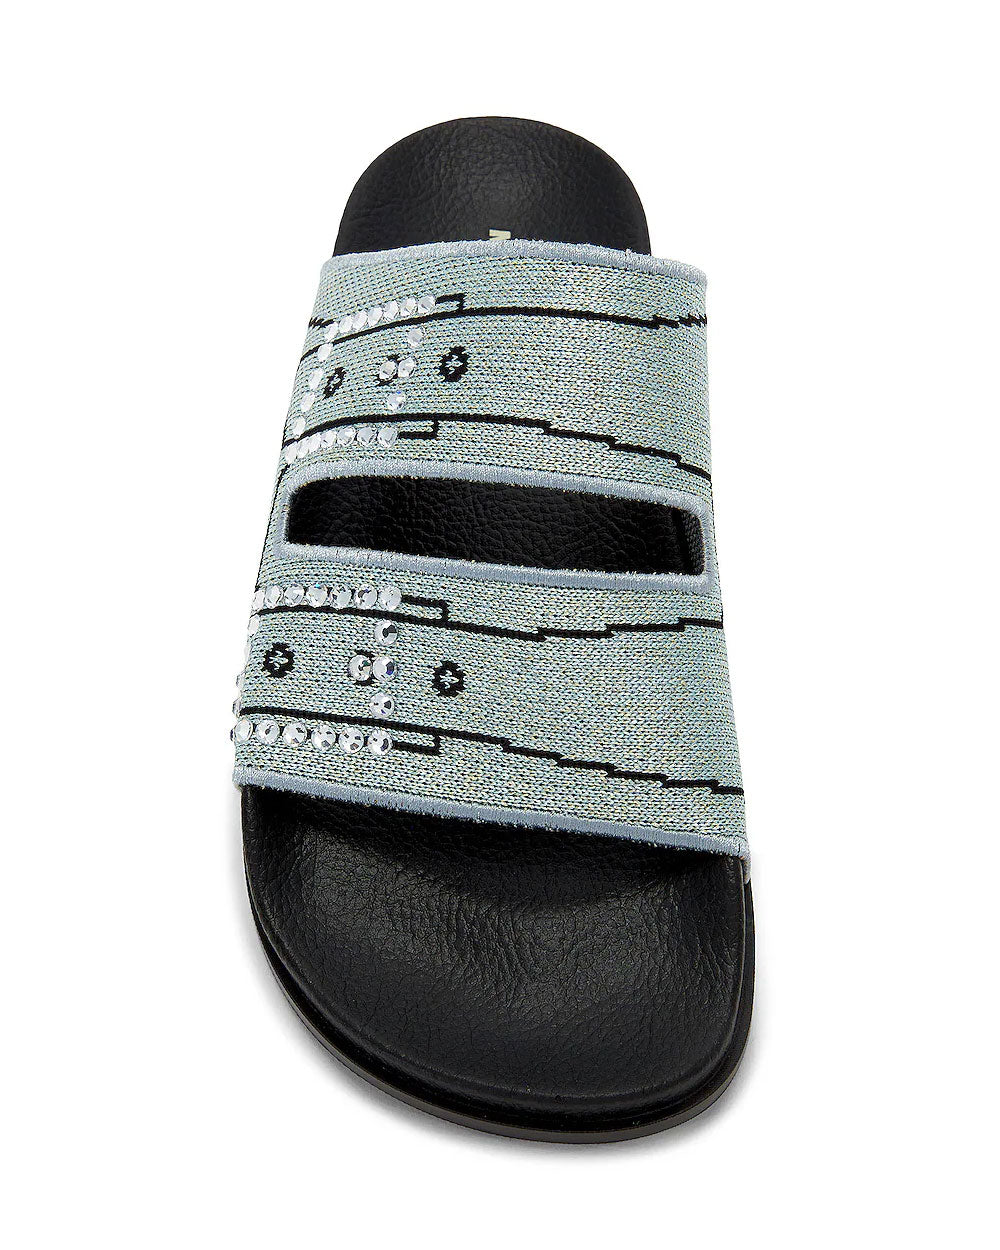 Embroidered Slip On Sandal in Silver